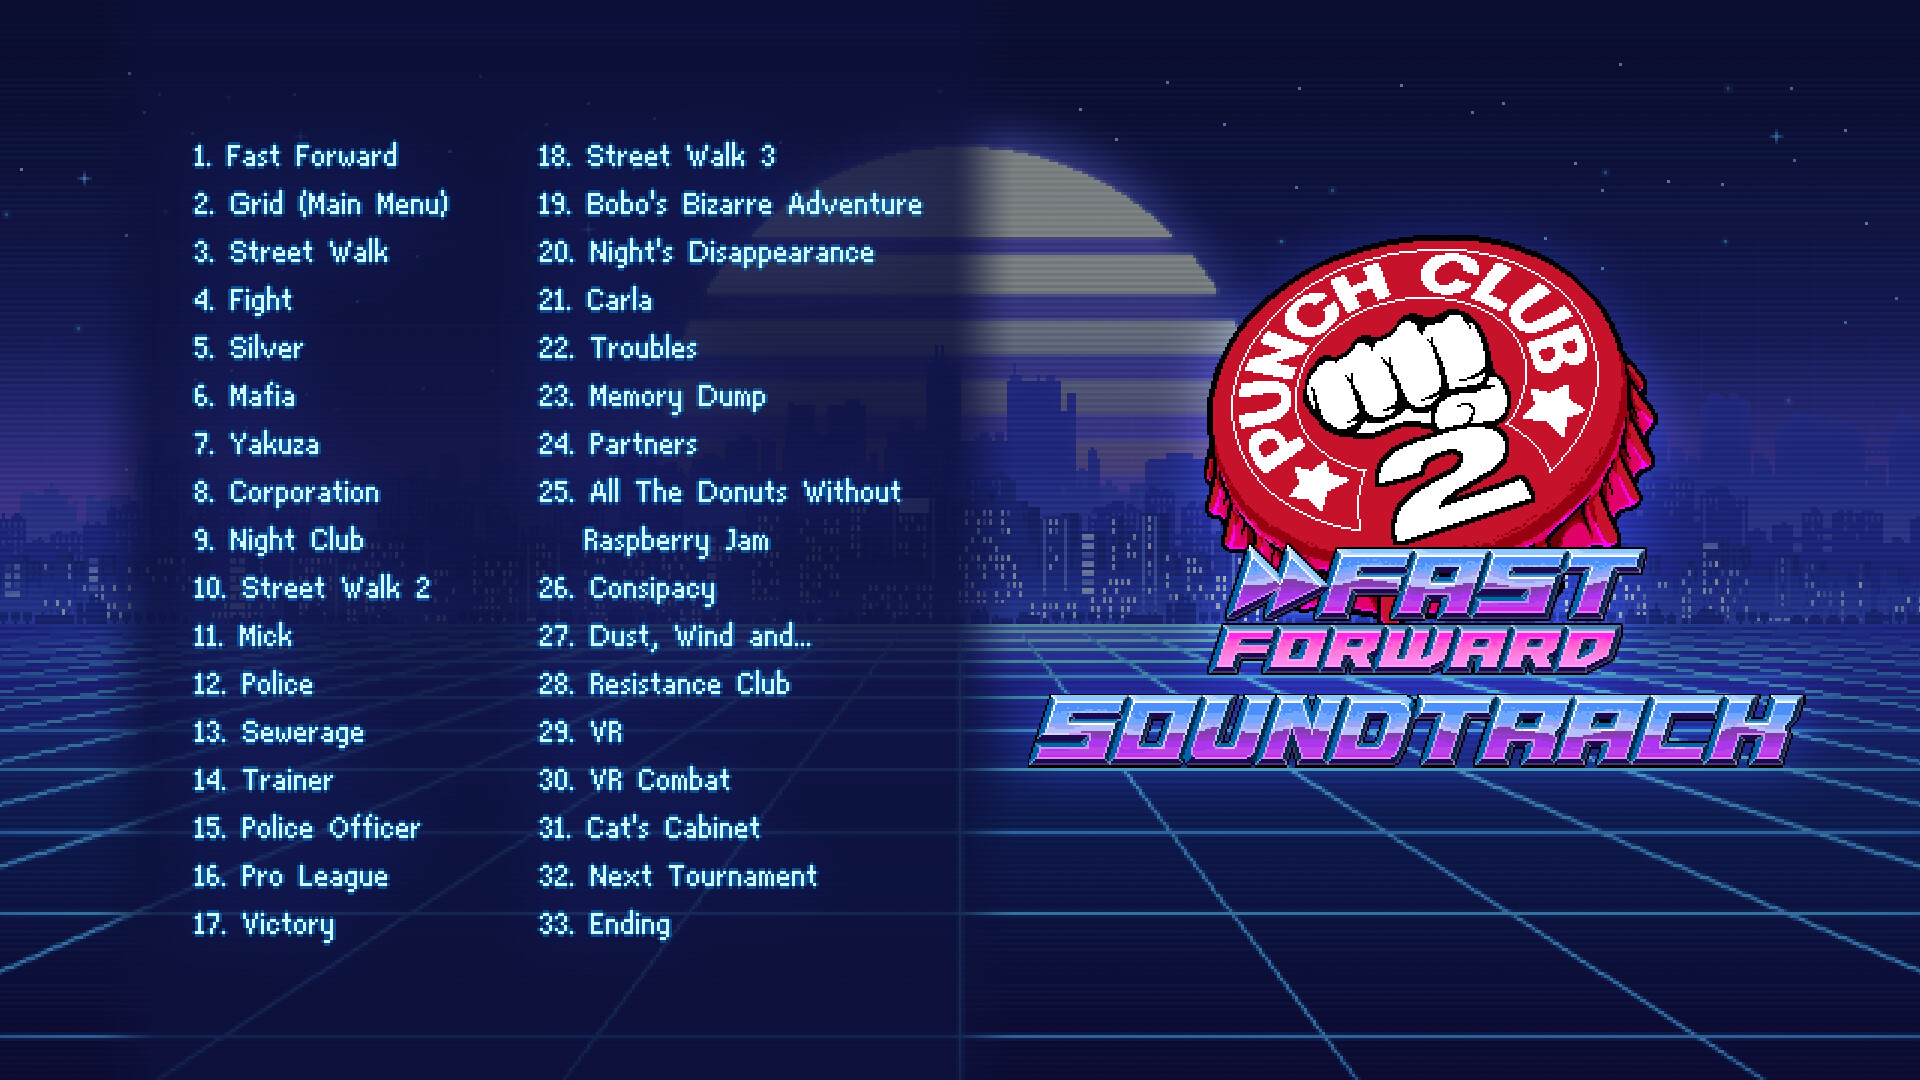 Punch Club 2: Fast Forward - Soundtrack Featured Screenshot #1